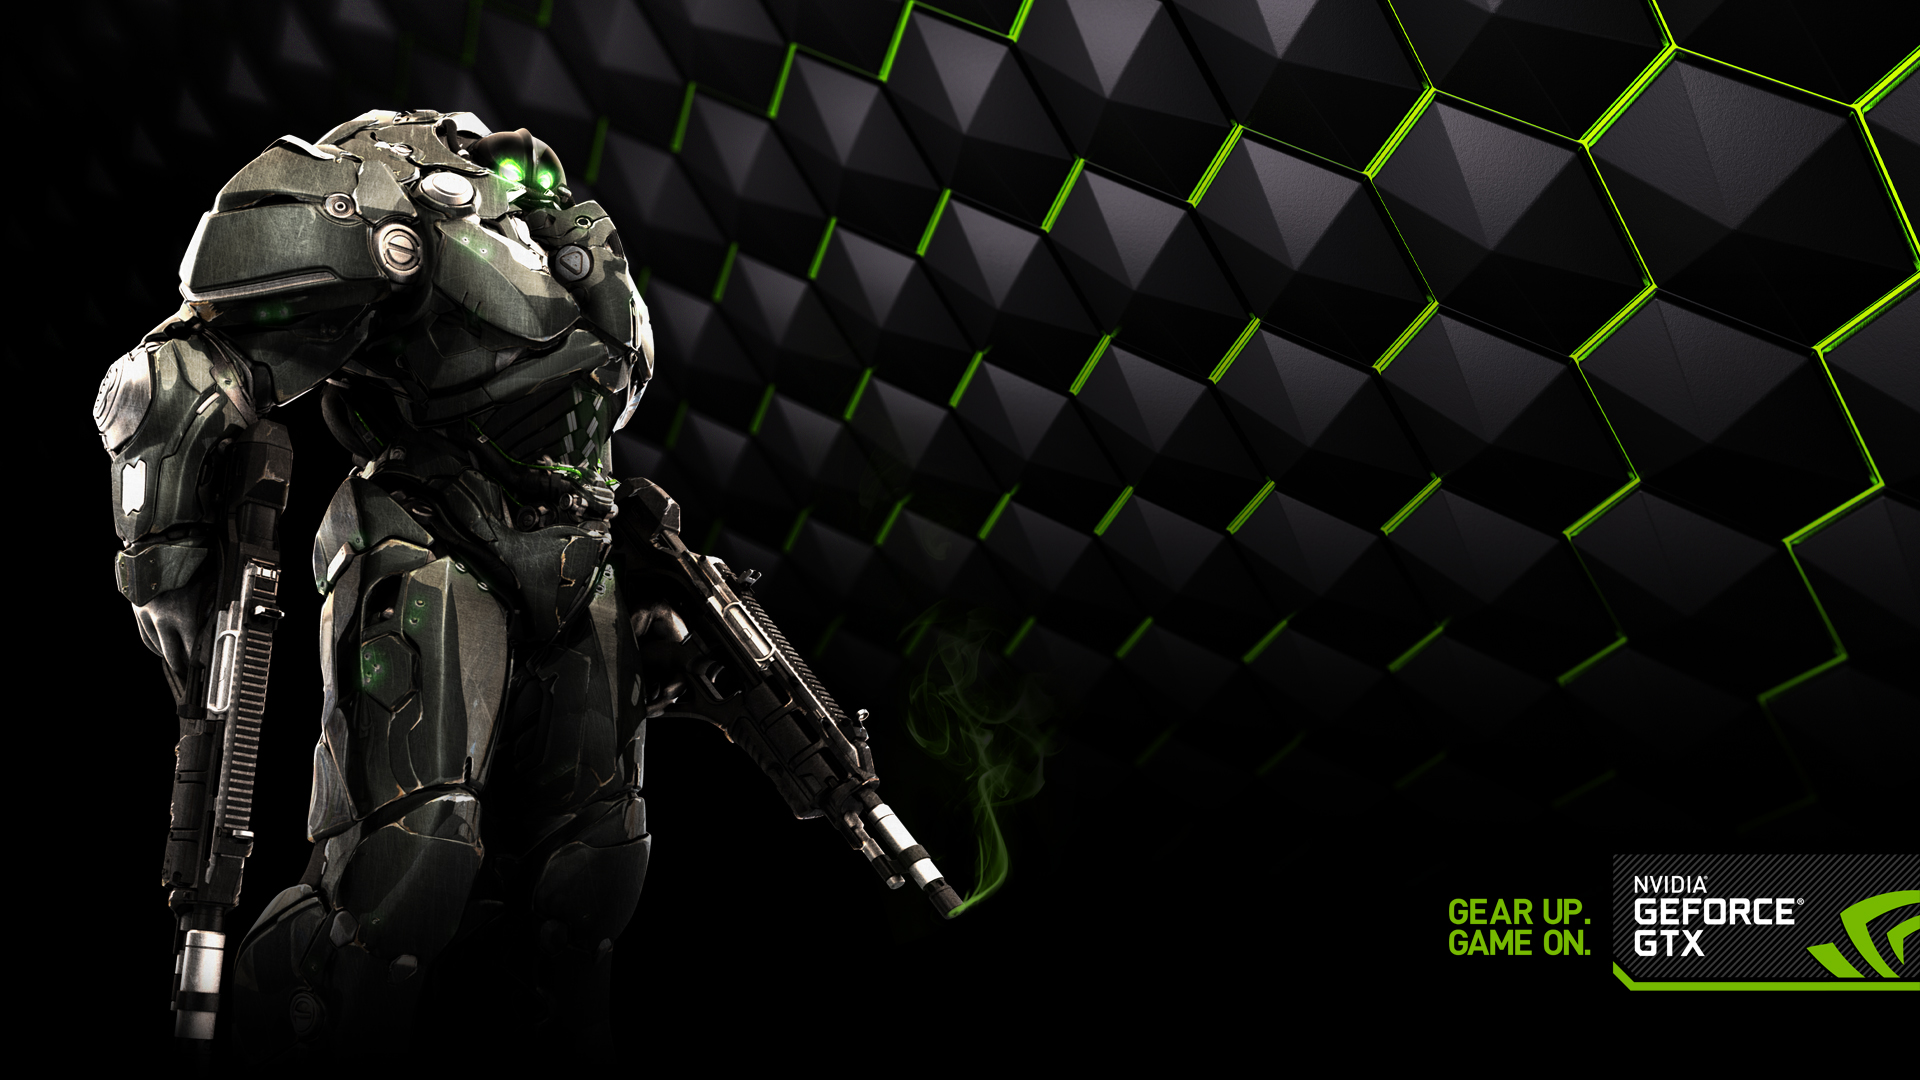 Gear Up Game On Wallpaper Nvidia Entertainment